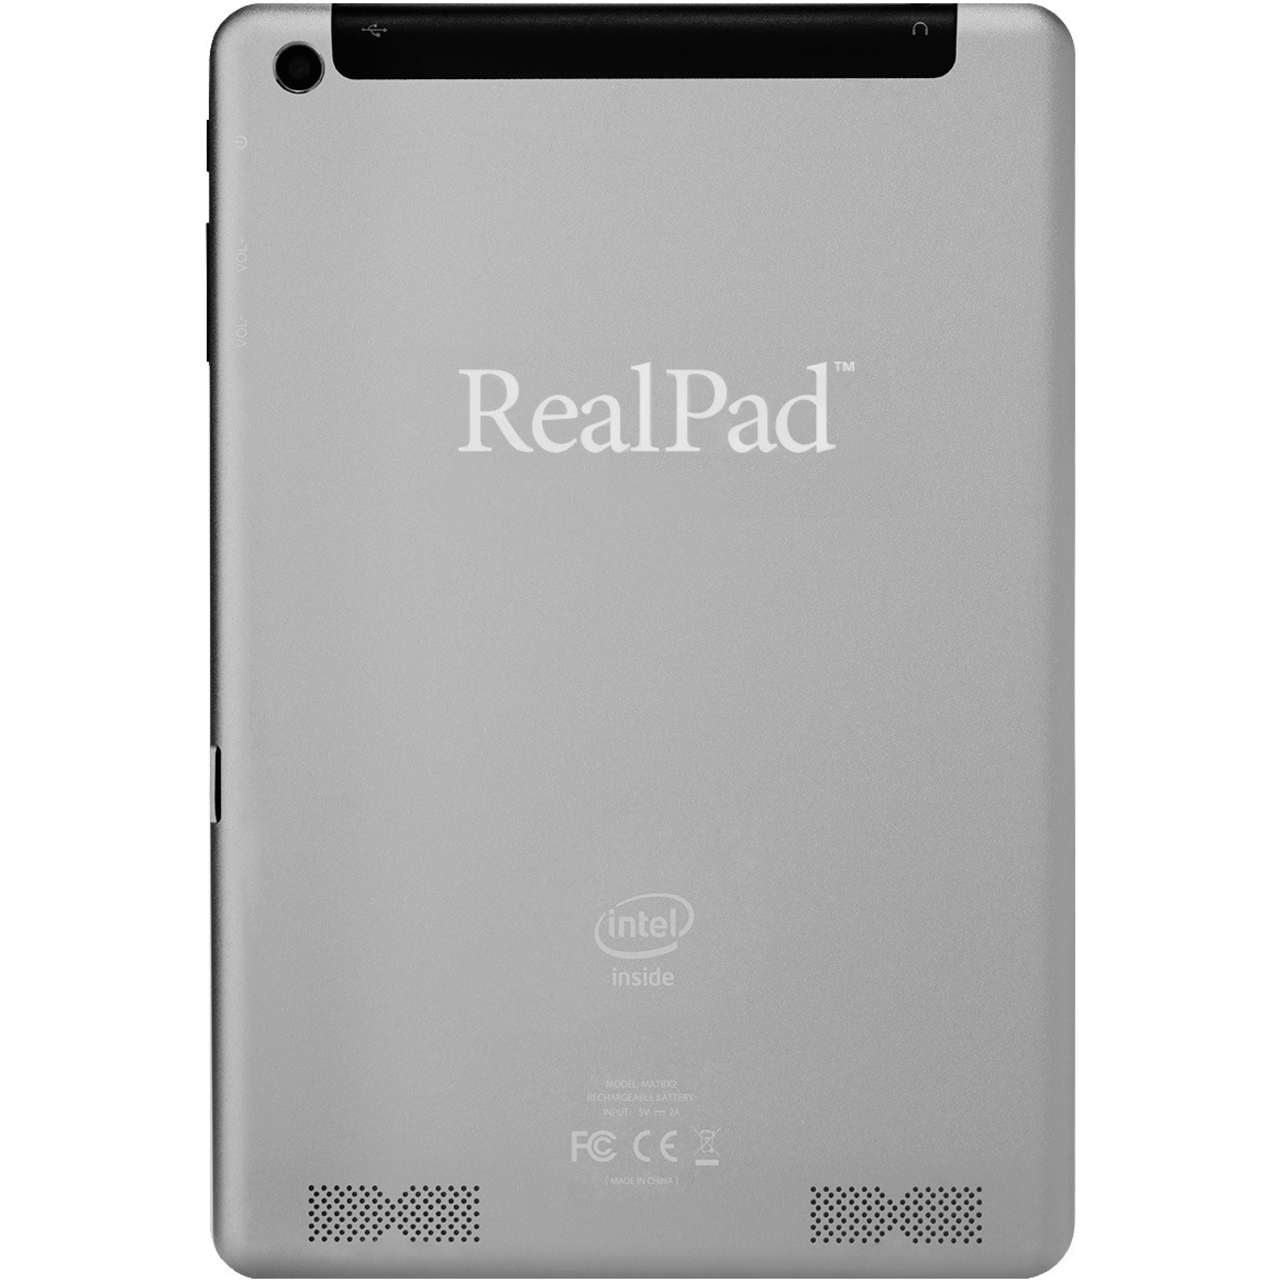 AARP RealPad MA7BX2 Tablet, 7.9", Atom Dual-core (2 Core) 1.20 GHz, 1 GB RAM, 16 GB Storage, Android 4.4 KitKat, Black - image 2 of 6